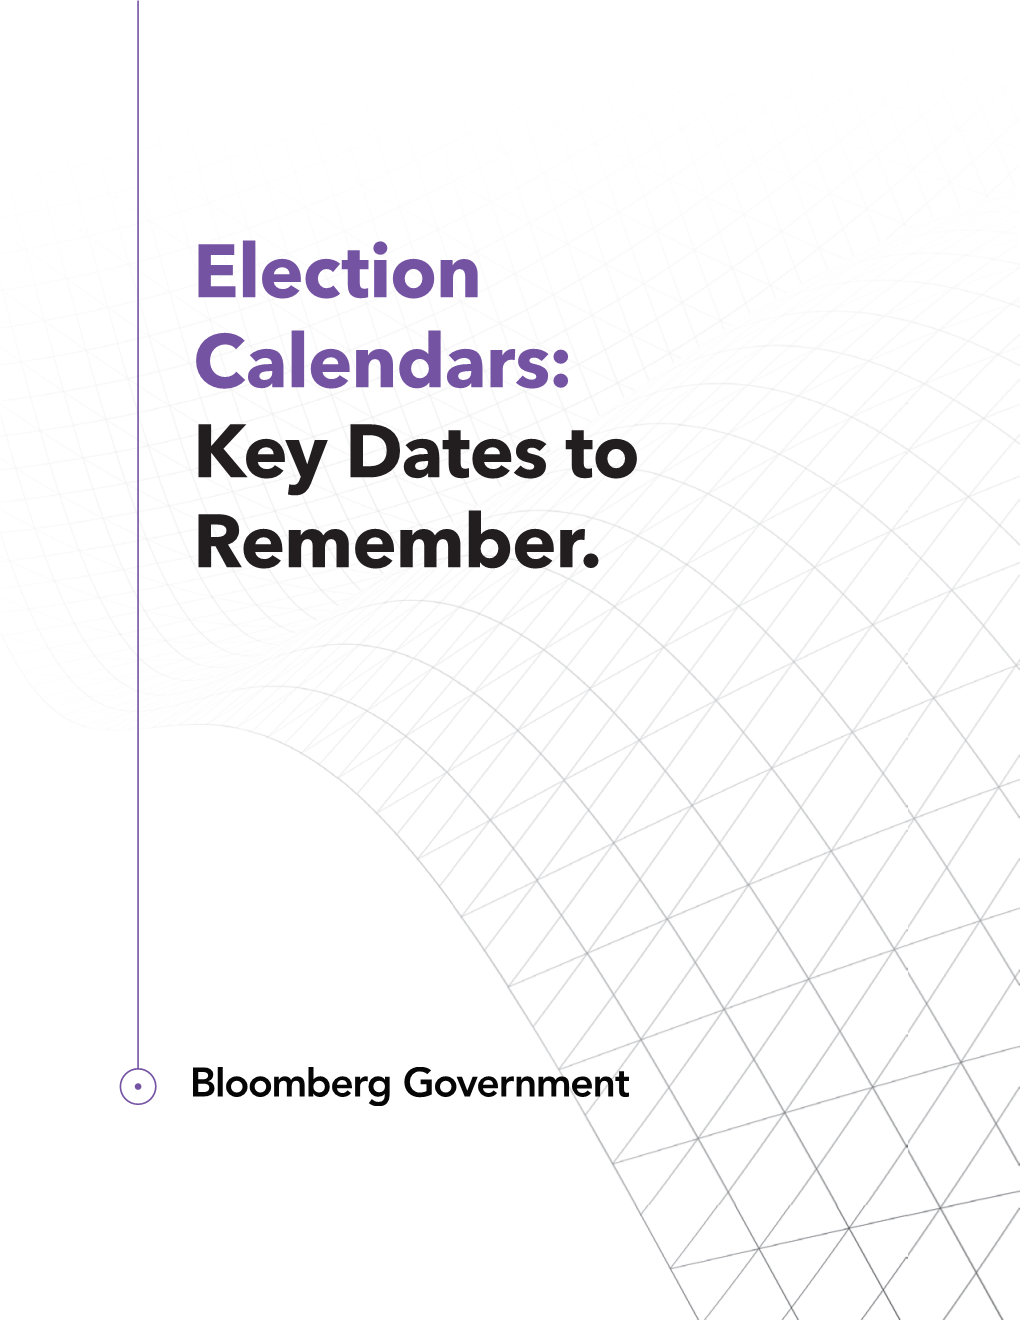 Election Calendars: Key Dates to Remember. 2020 Congressional Primary Calendar